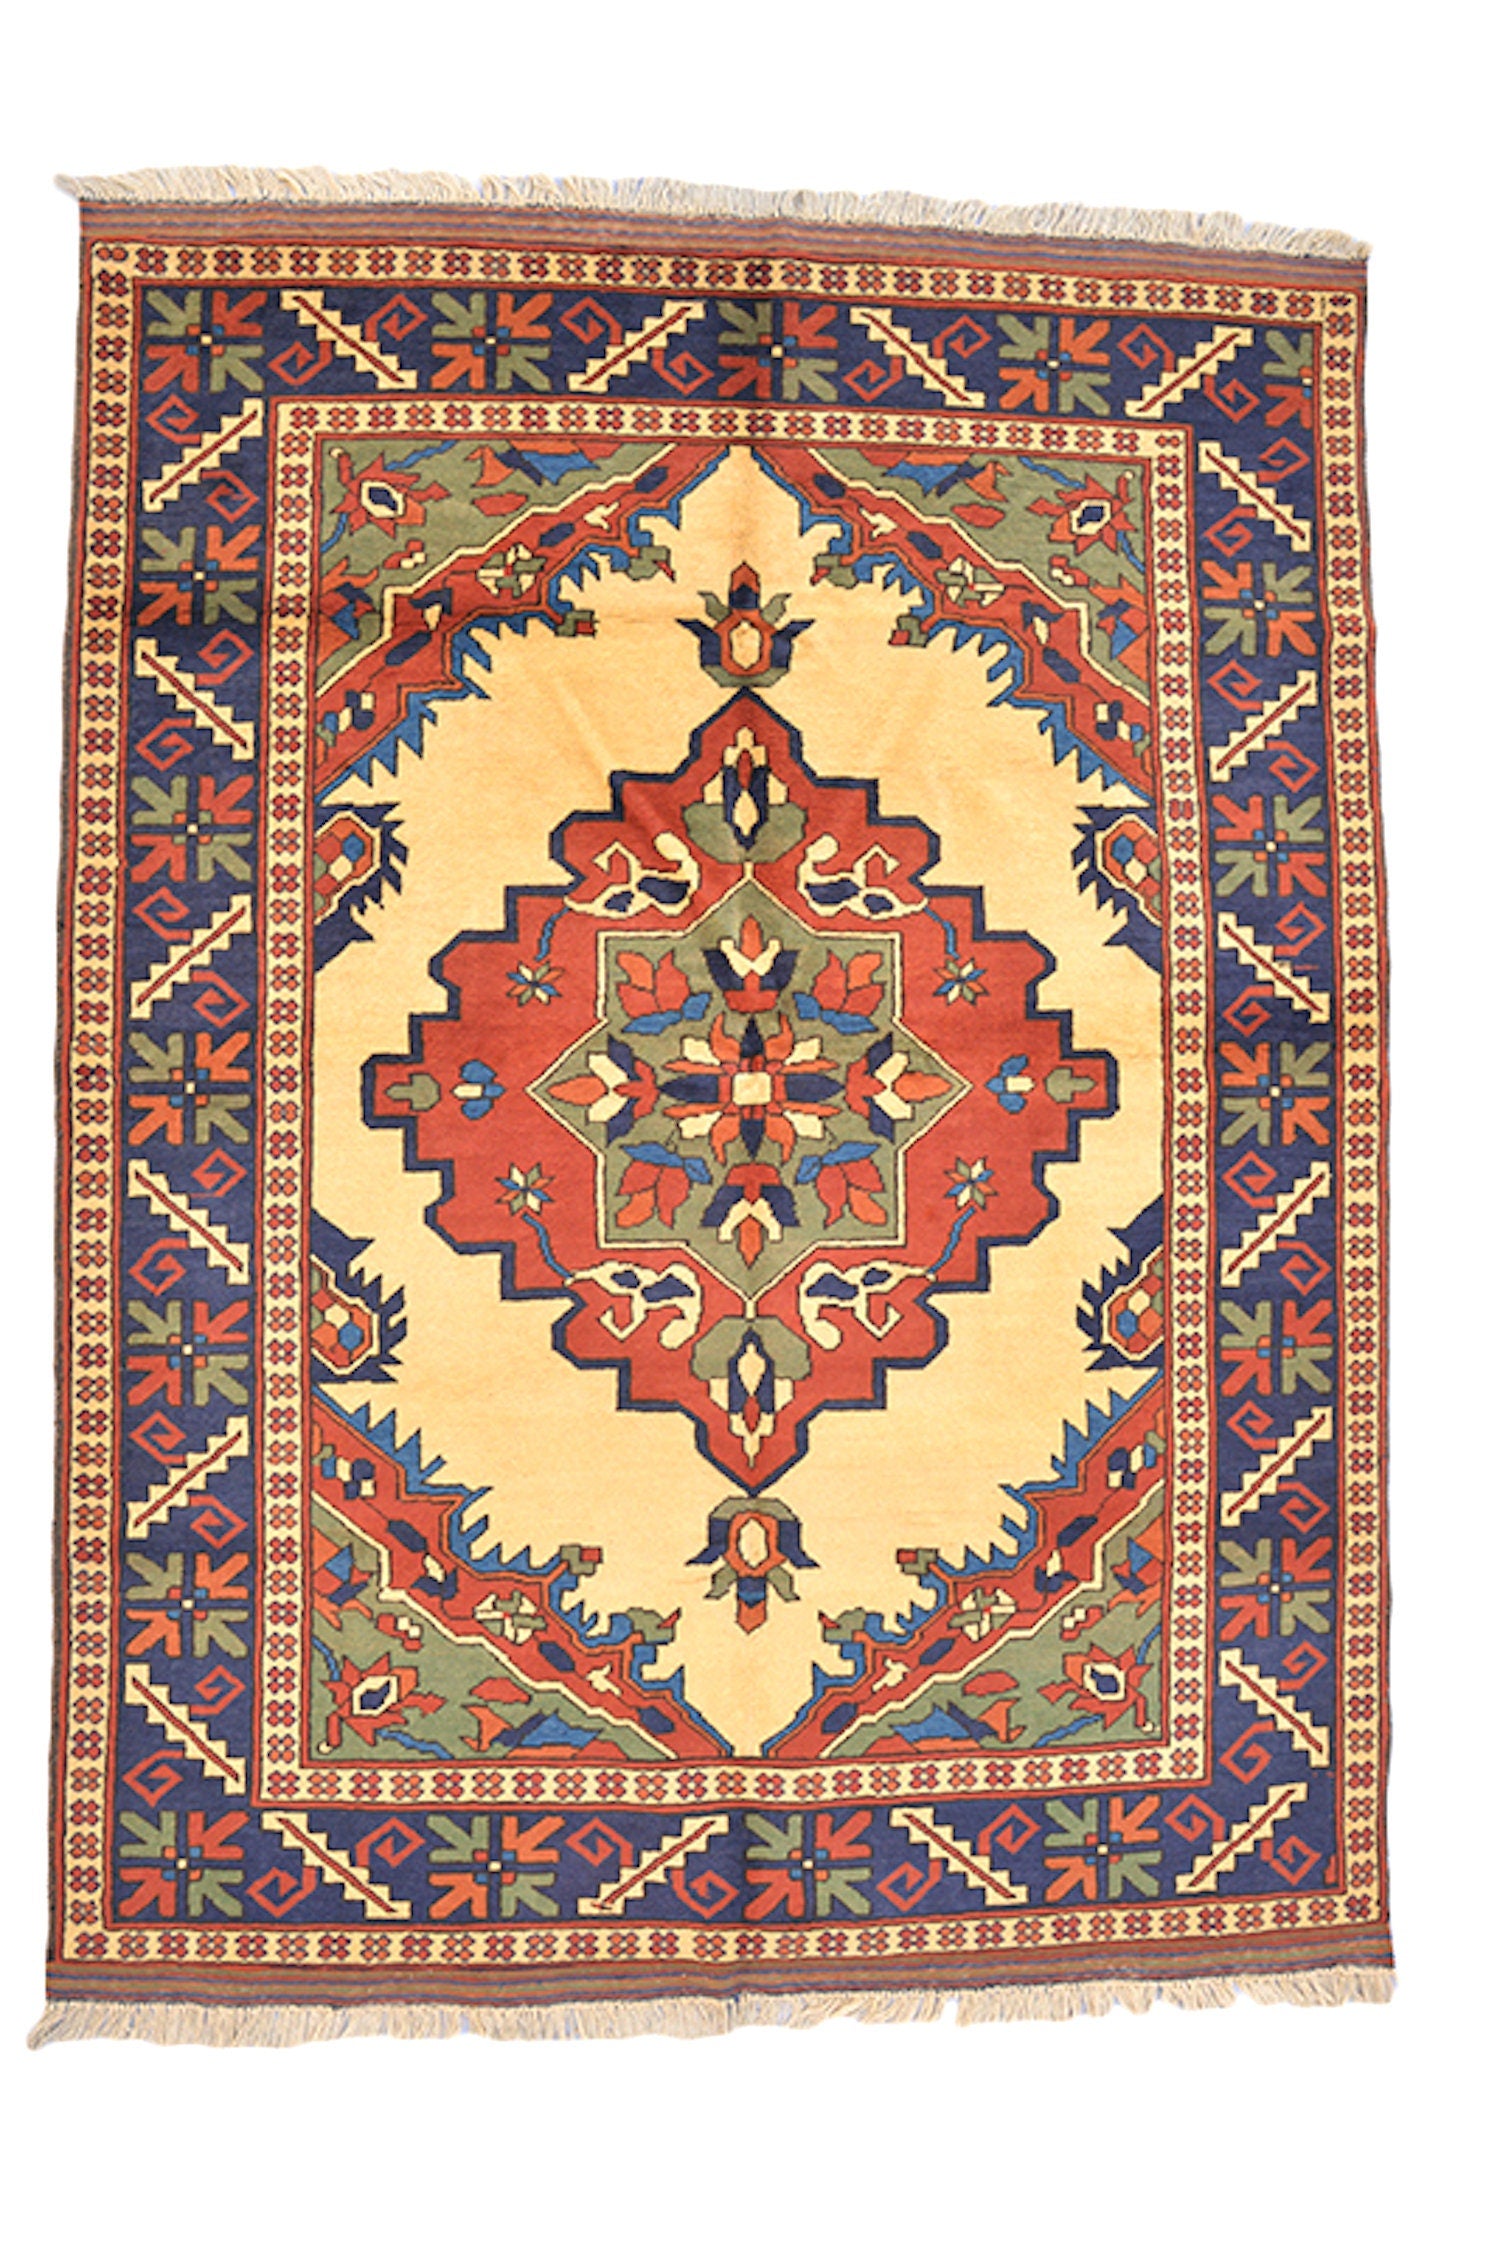 Size: 6'8" x 5'2" Ft | Hand Knotted Medallion Rug | Vintage Tribal Area Rug | Yellow Background Red Blue Pattern | Oriental Persian Rug